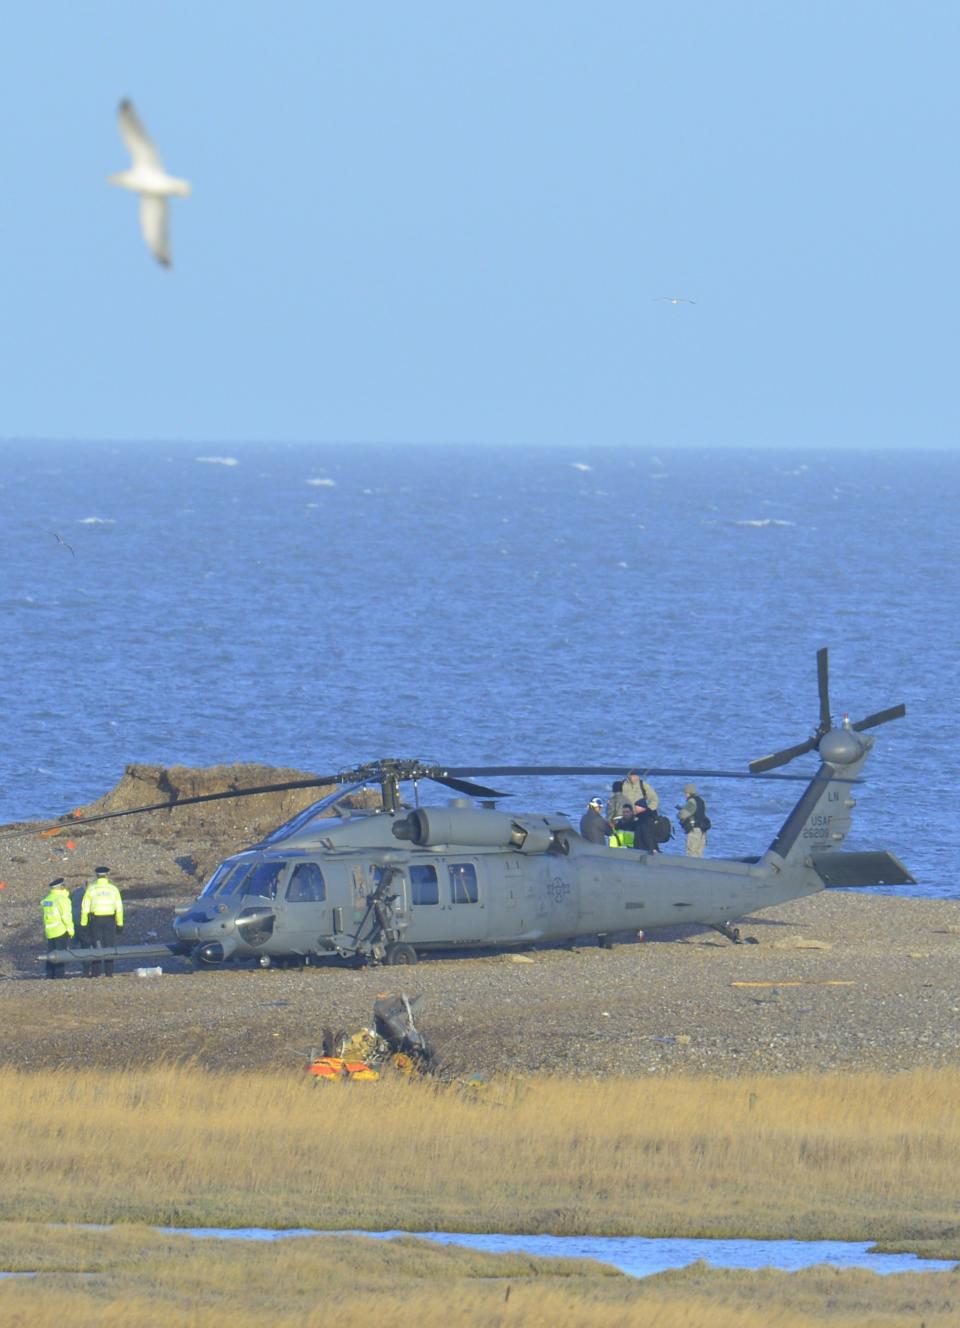 A Pave Hawk helicopter, military personnel and emergency services attend the scene of a helicopter crash on the coast near the village of Cley in Norfolk, eastern England